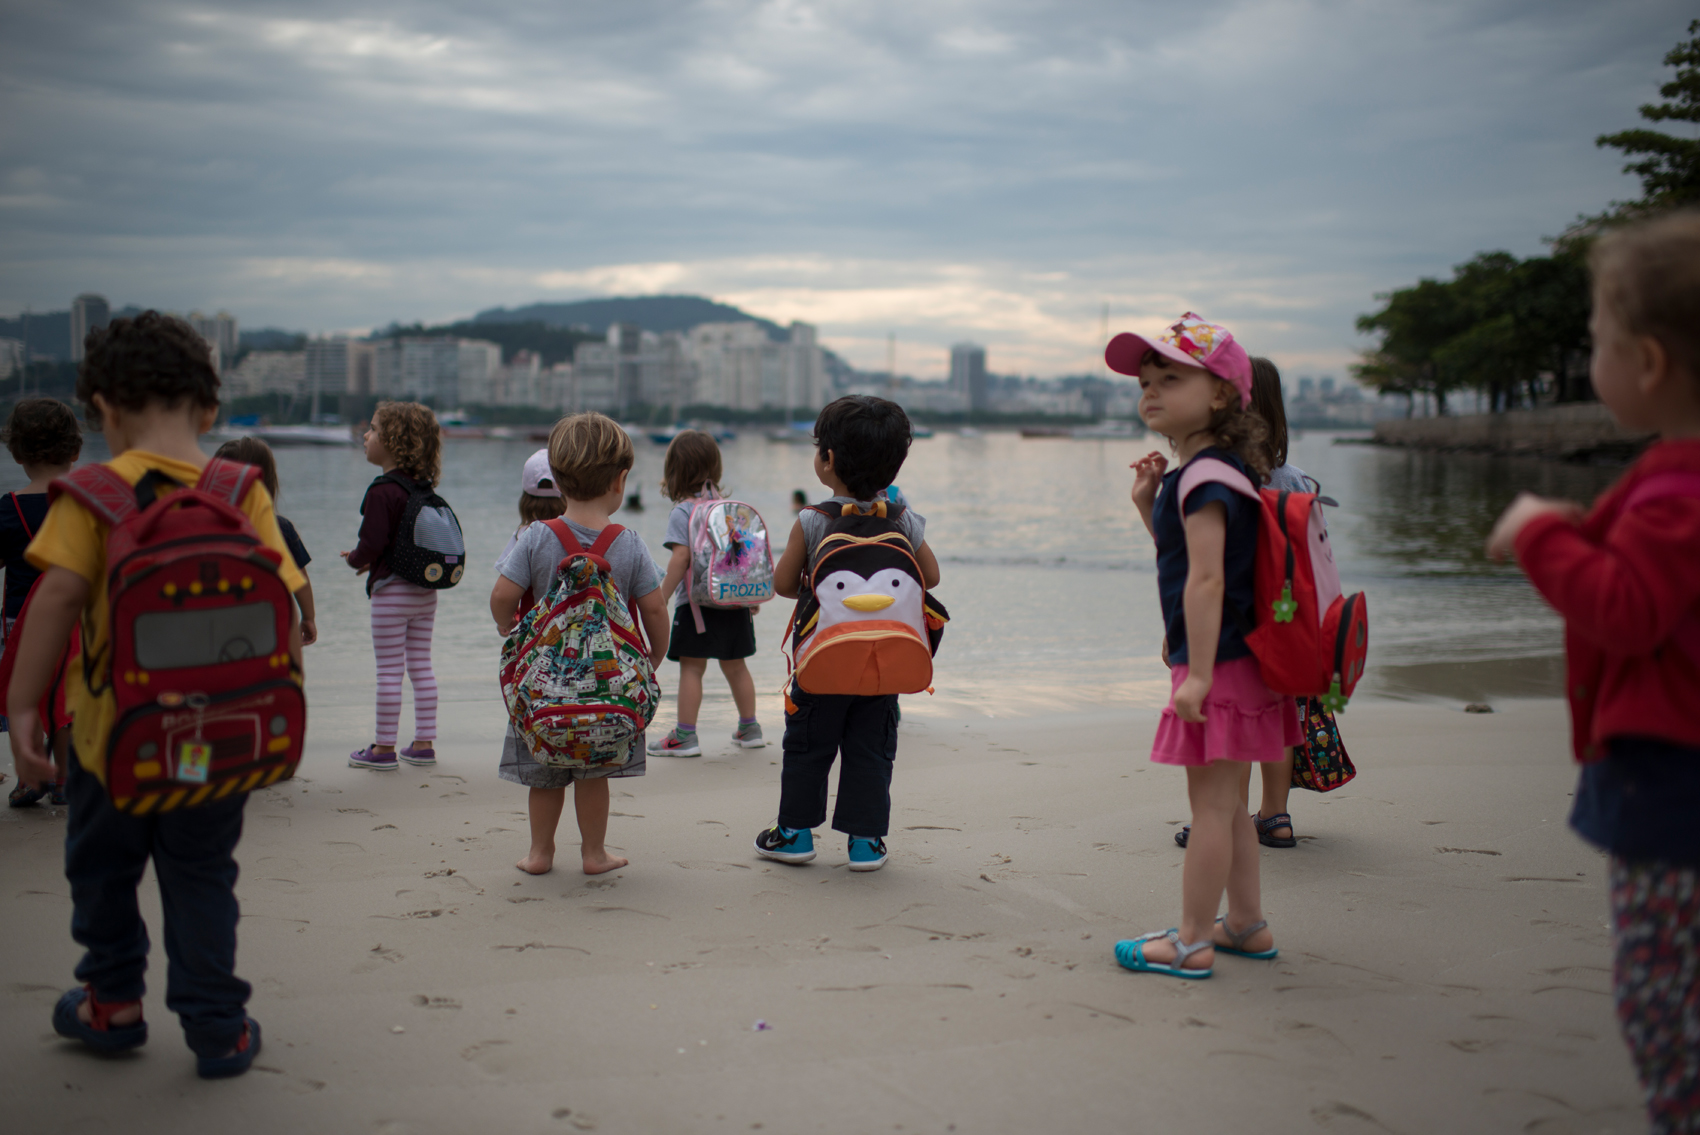  BG500 was originally founded to work on many levels of environmental education. Ed gives classes to children of all ages, developing their sensibility to marine live. Many times, play activities awaken curiosity and encourage children to understand 